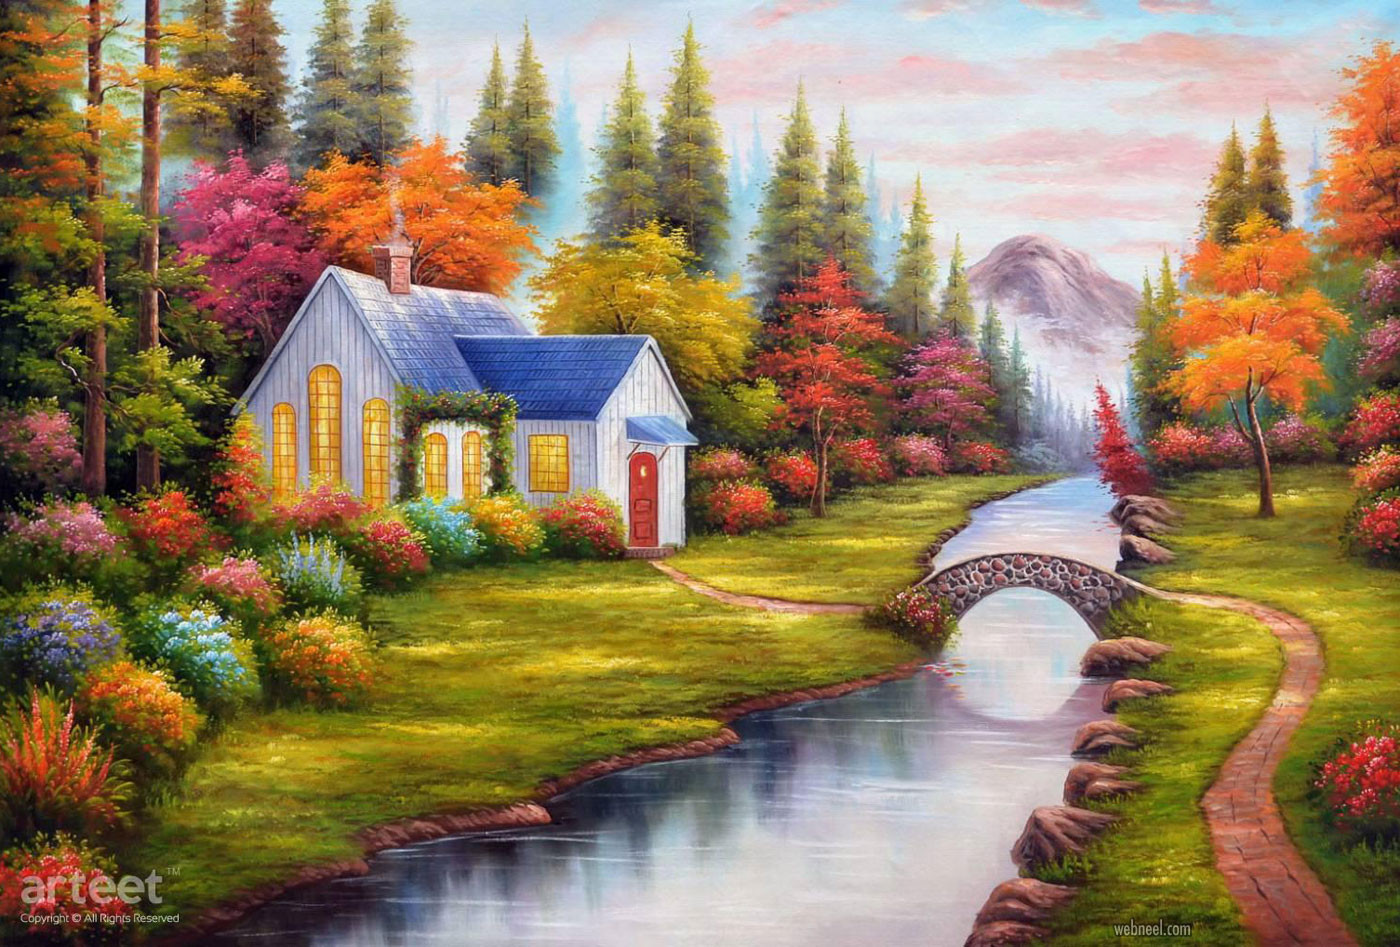 Landscape Oil Painting
 20 Beautiful Landscape Oil Paintings and art works from